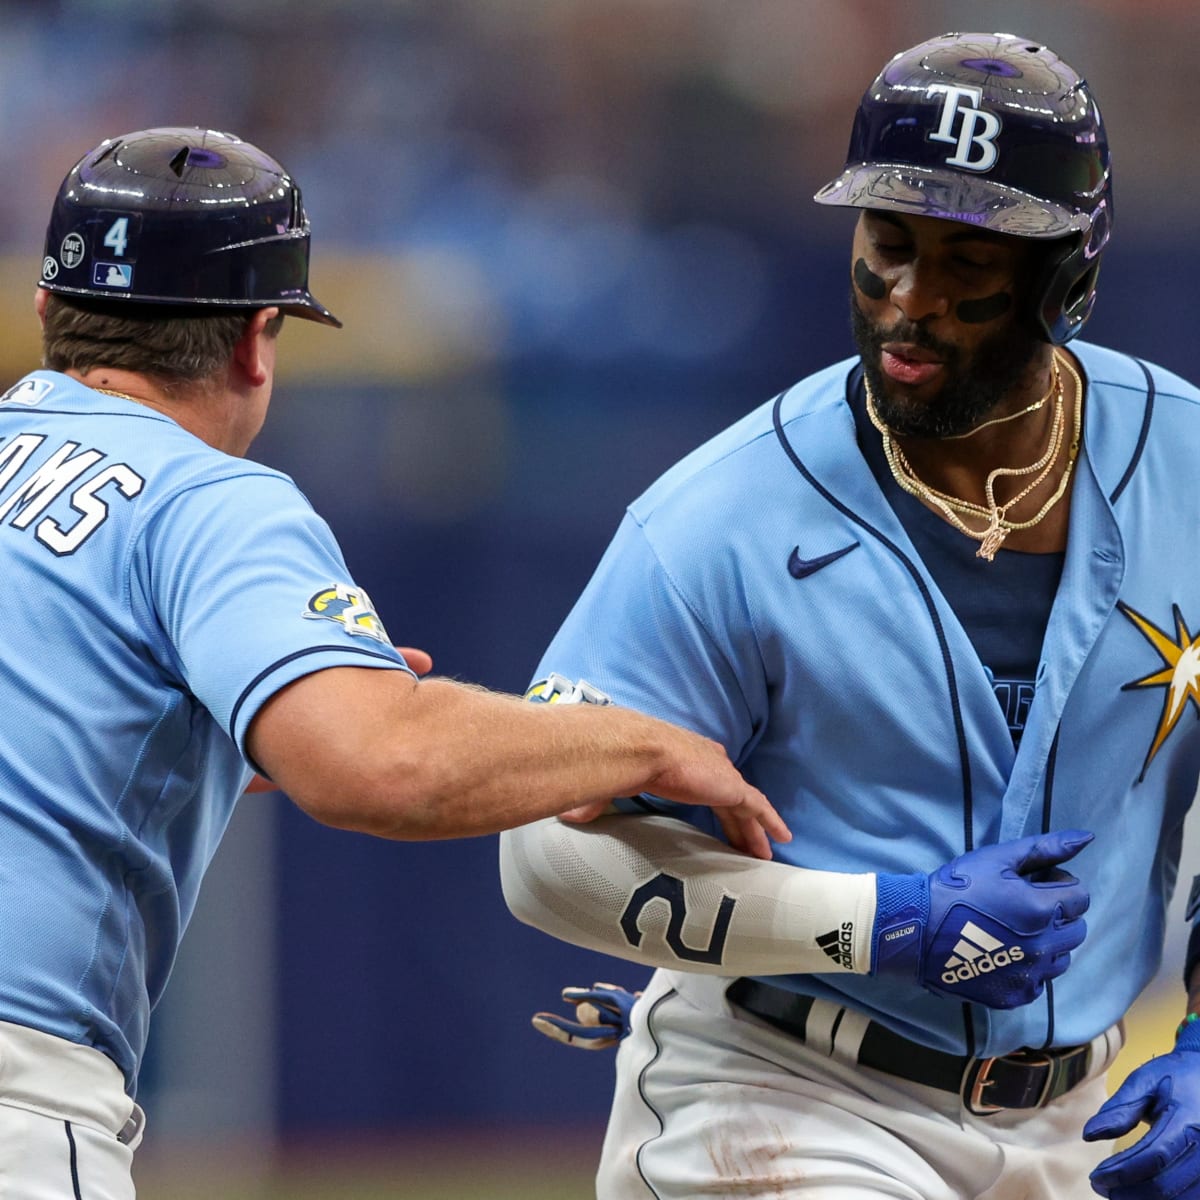 Tampa Bay Rays' undefeated streak reaches 13, tying MLB record